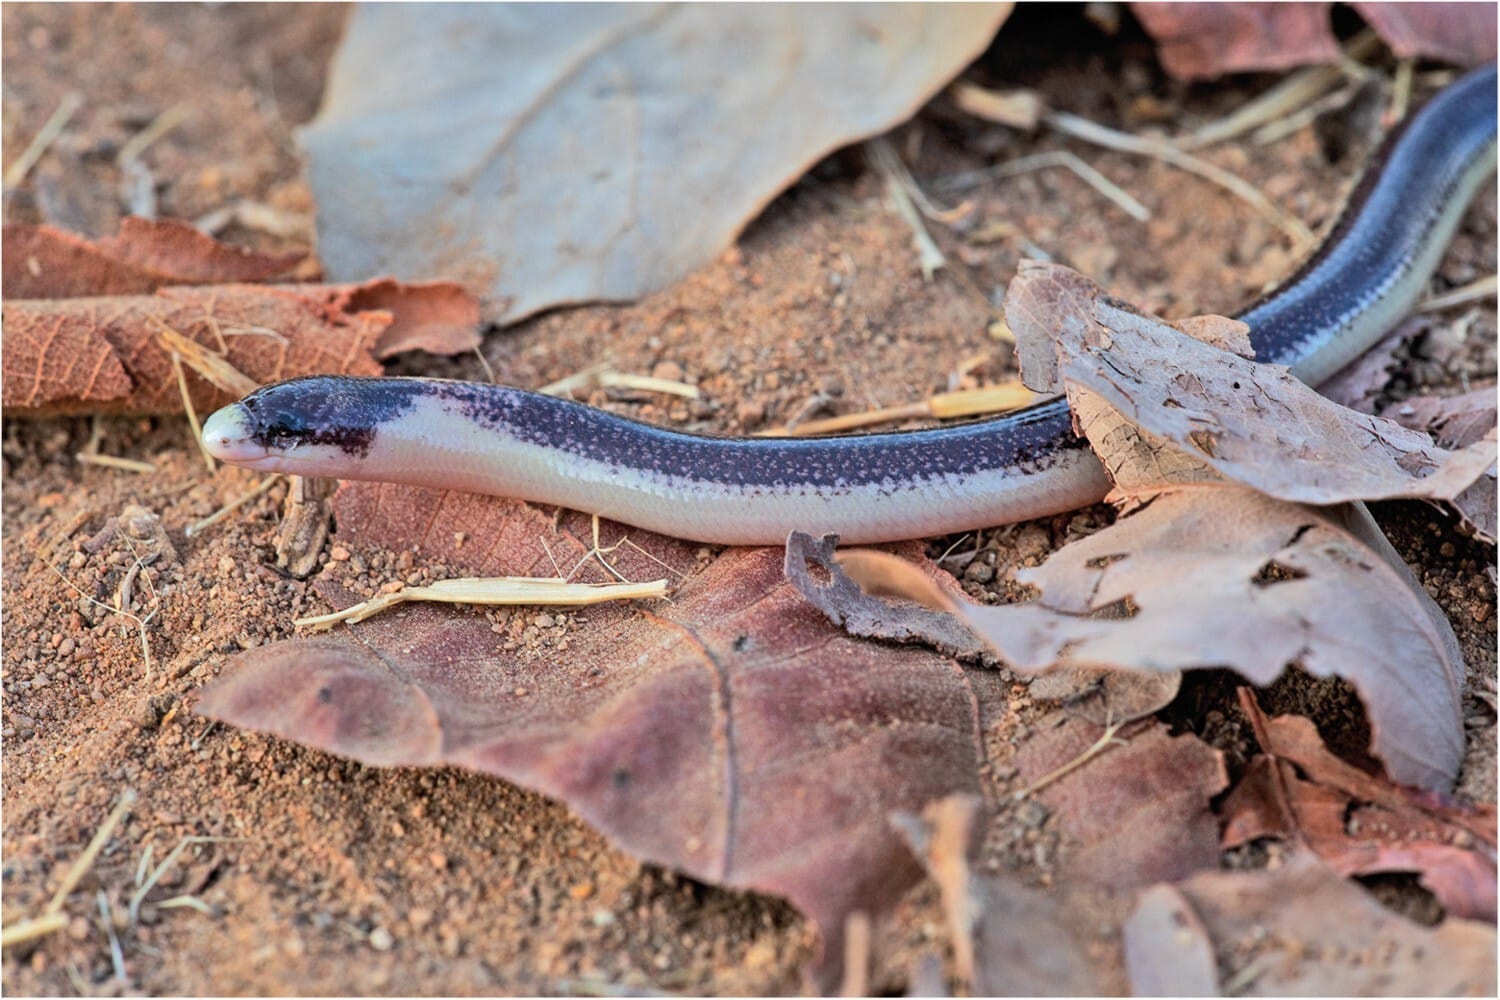 New Species of Legless Skink Discovered in Africa